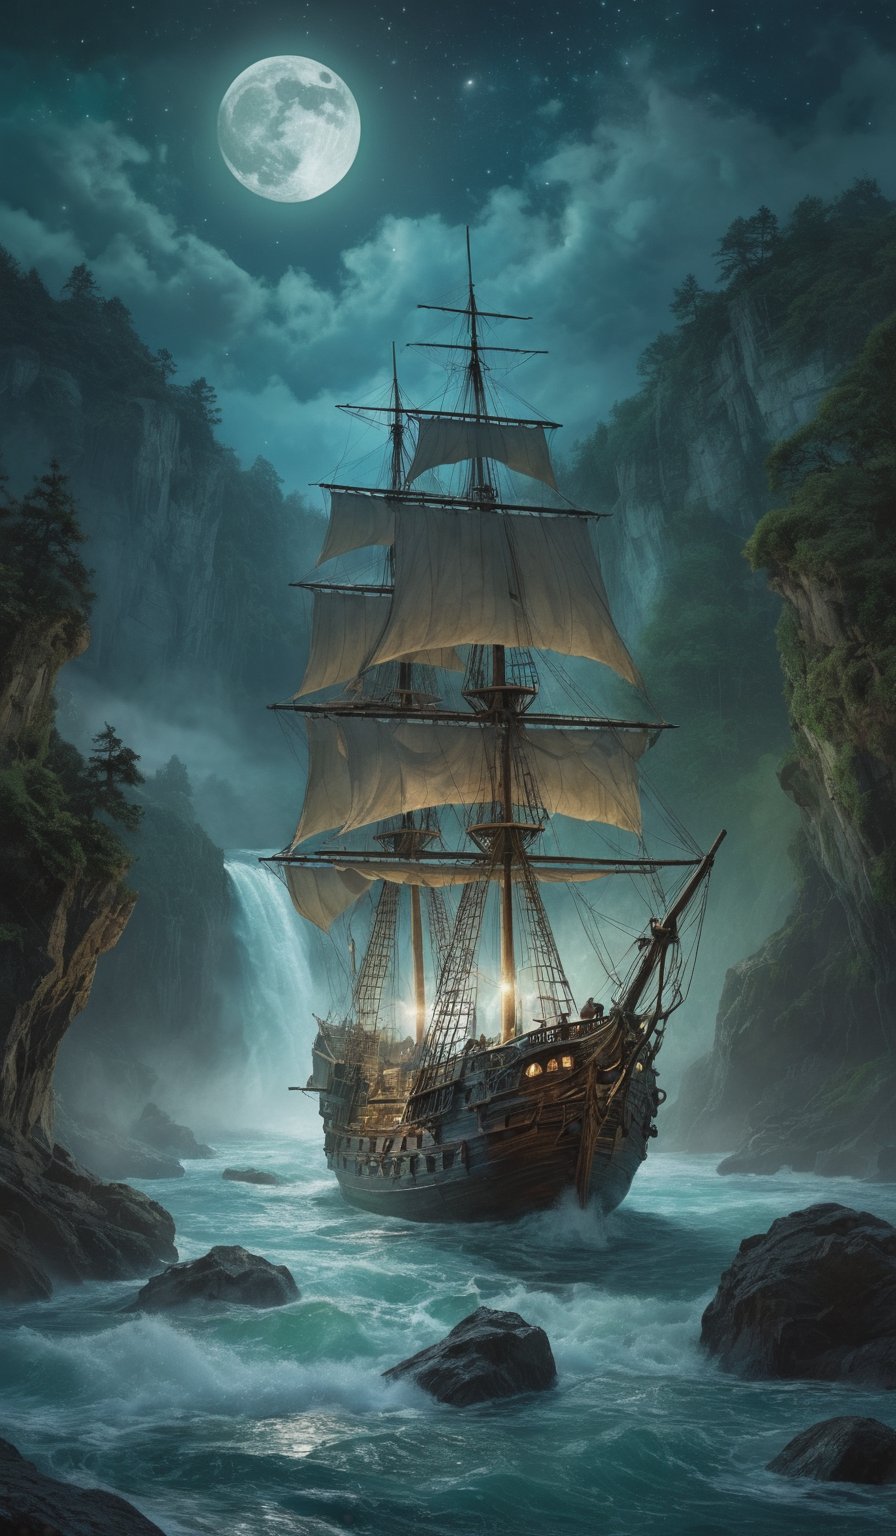 Under the radiant blue moon and twinkling stars, a ghostly pirate ship teeters precariously at the edge of a roaring waterfall. The night air is heavy with mist as the ship's weathered sails billow in the windless darkness. Brushstrokes of deep blues and velvety greens swirl together, evoking a sense of mystery and romance. In the foreground, a delicate crescent moon casts an ethereal glow on the turbulent water below. Thick, textured strokes add depth and dimension to this breathtaking digital painting, reminiscent of the works of Karol Bok, Brian Froud, Wendy Froud, Guy Davis, and Sergio Sandoval.